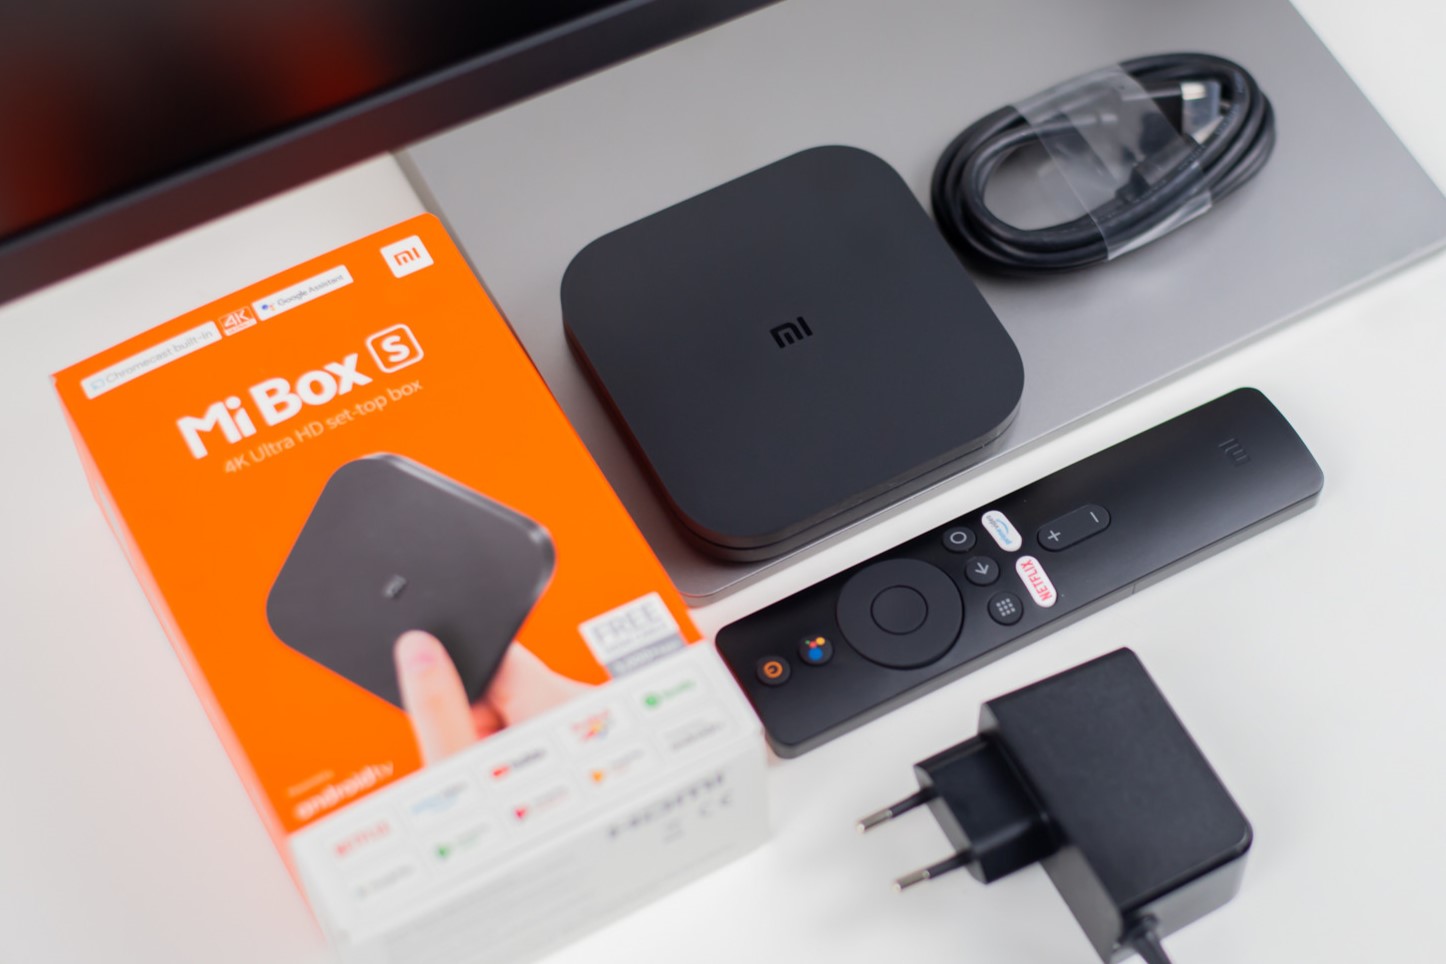 Exploring The Functions Of Xiaomi Mi Box: A Quick Guide